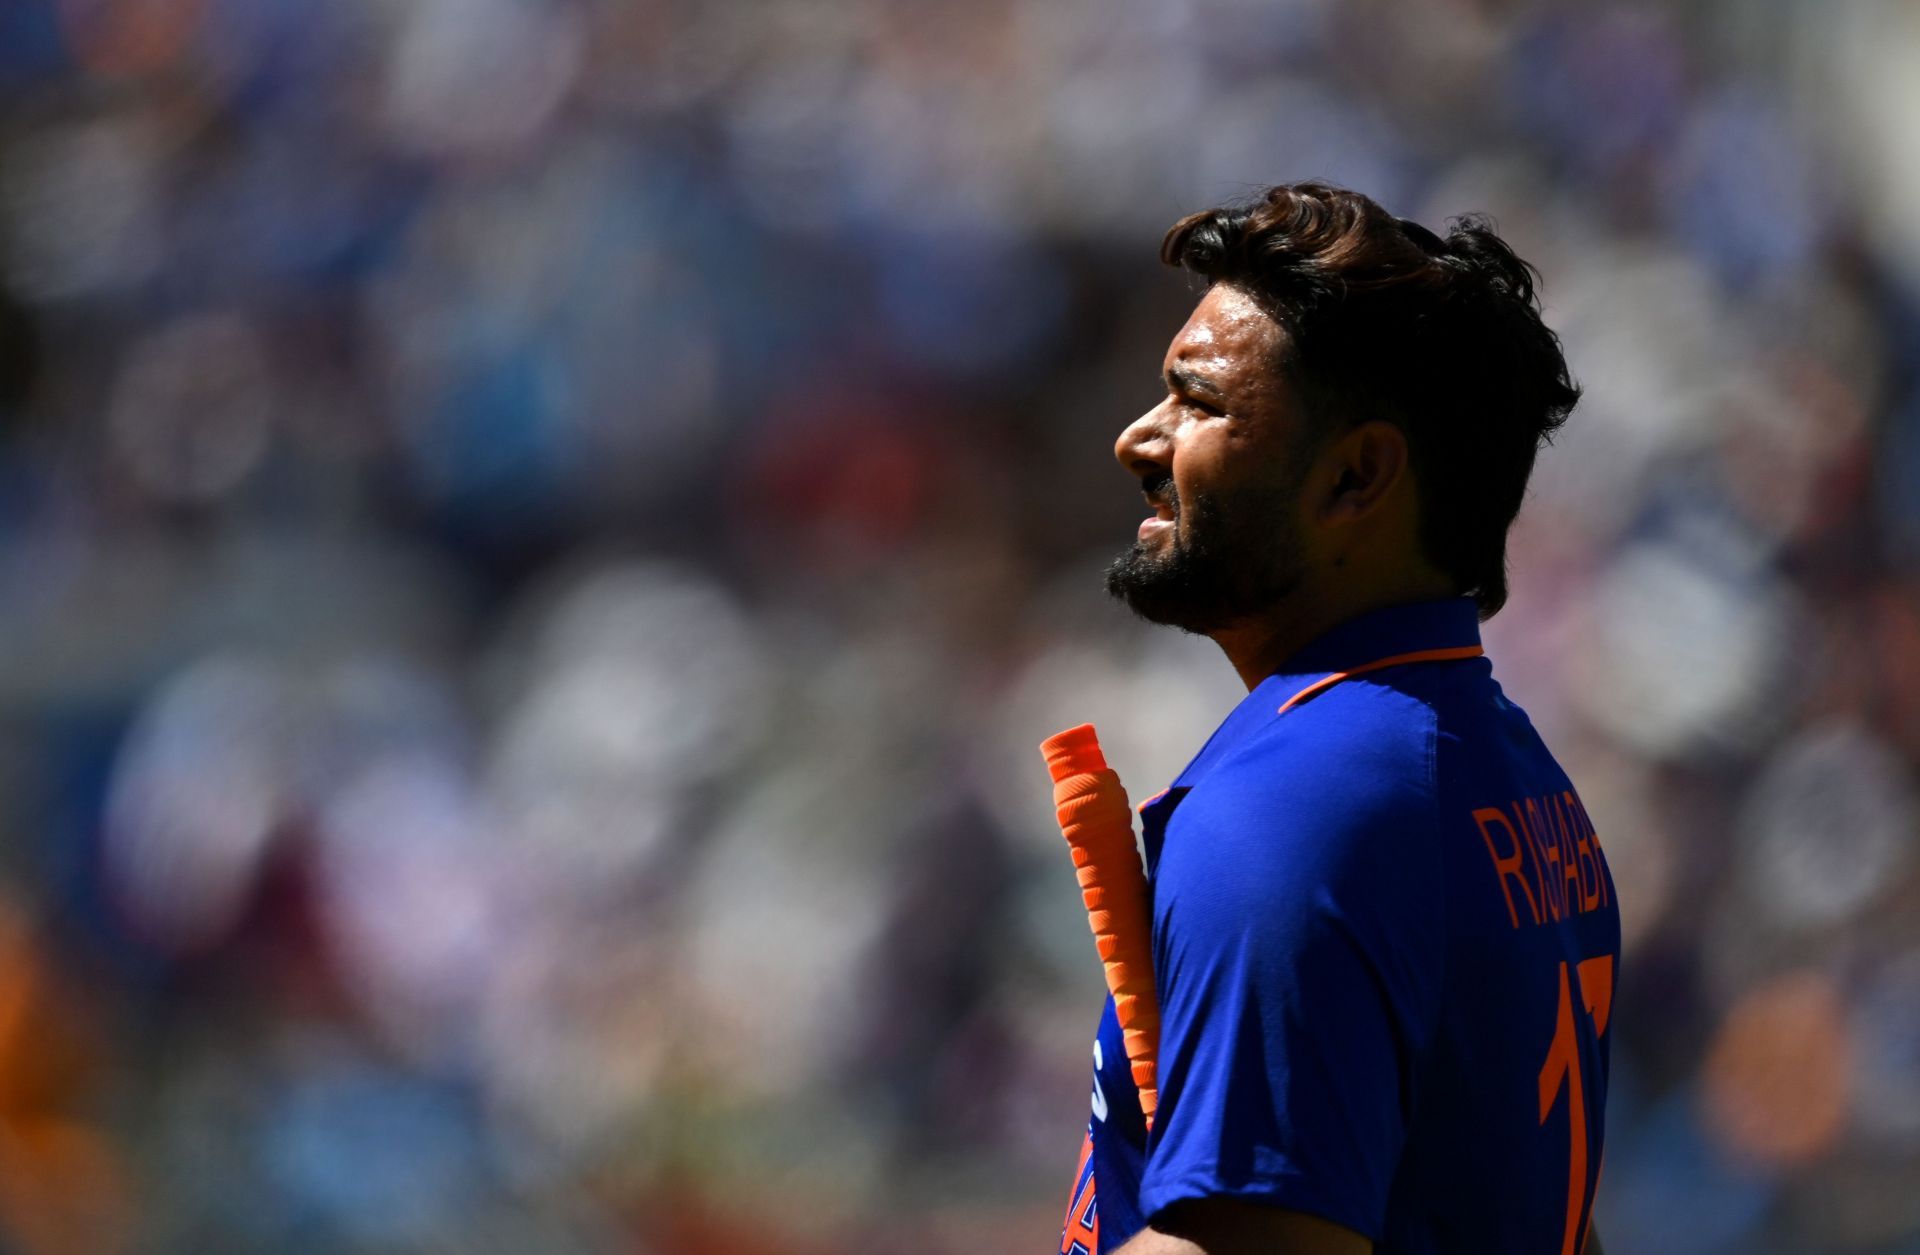 3 captaincy blunders from Rishabh Pant that cost his side.